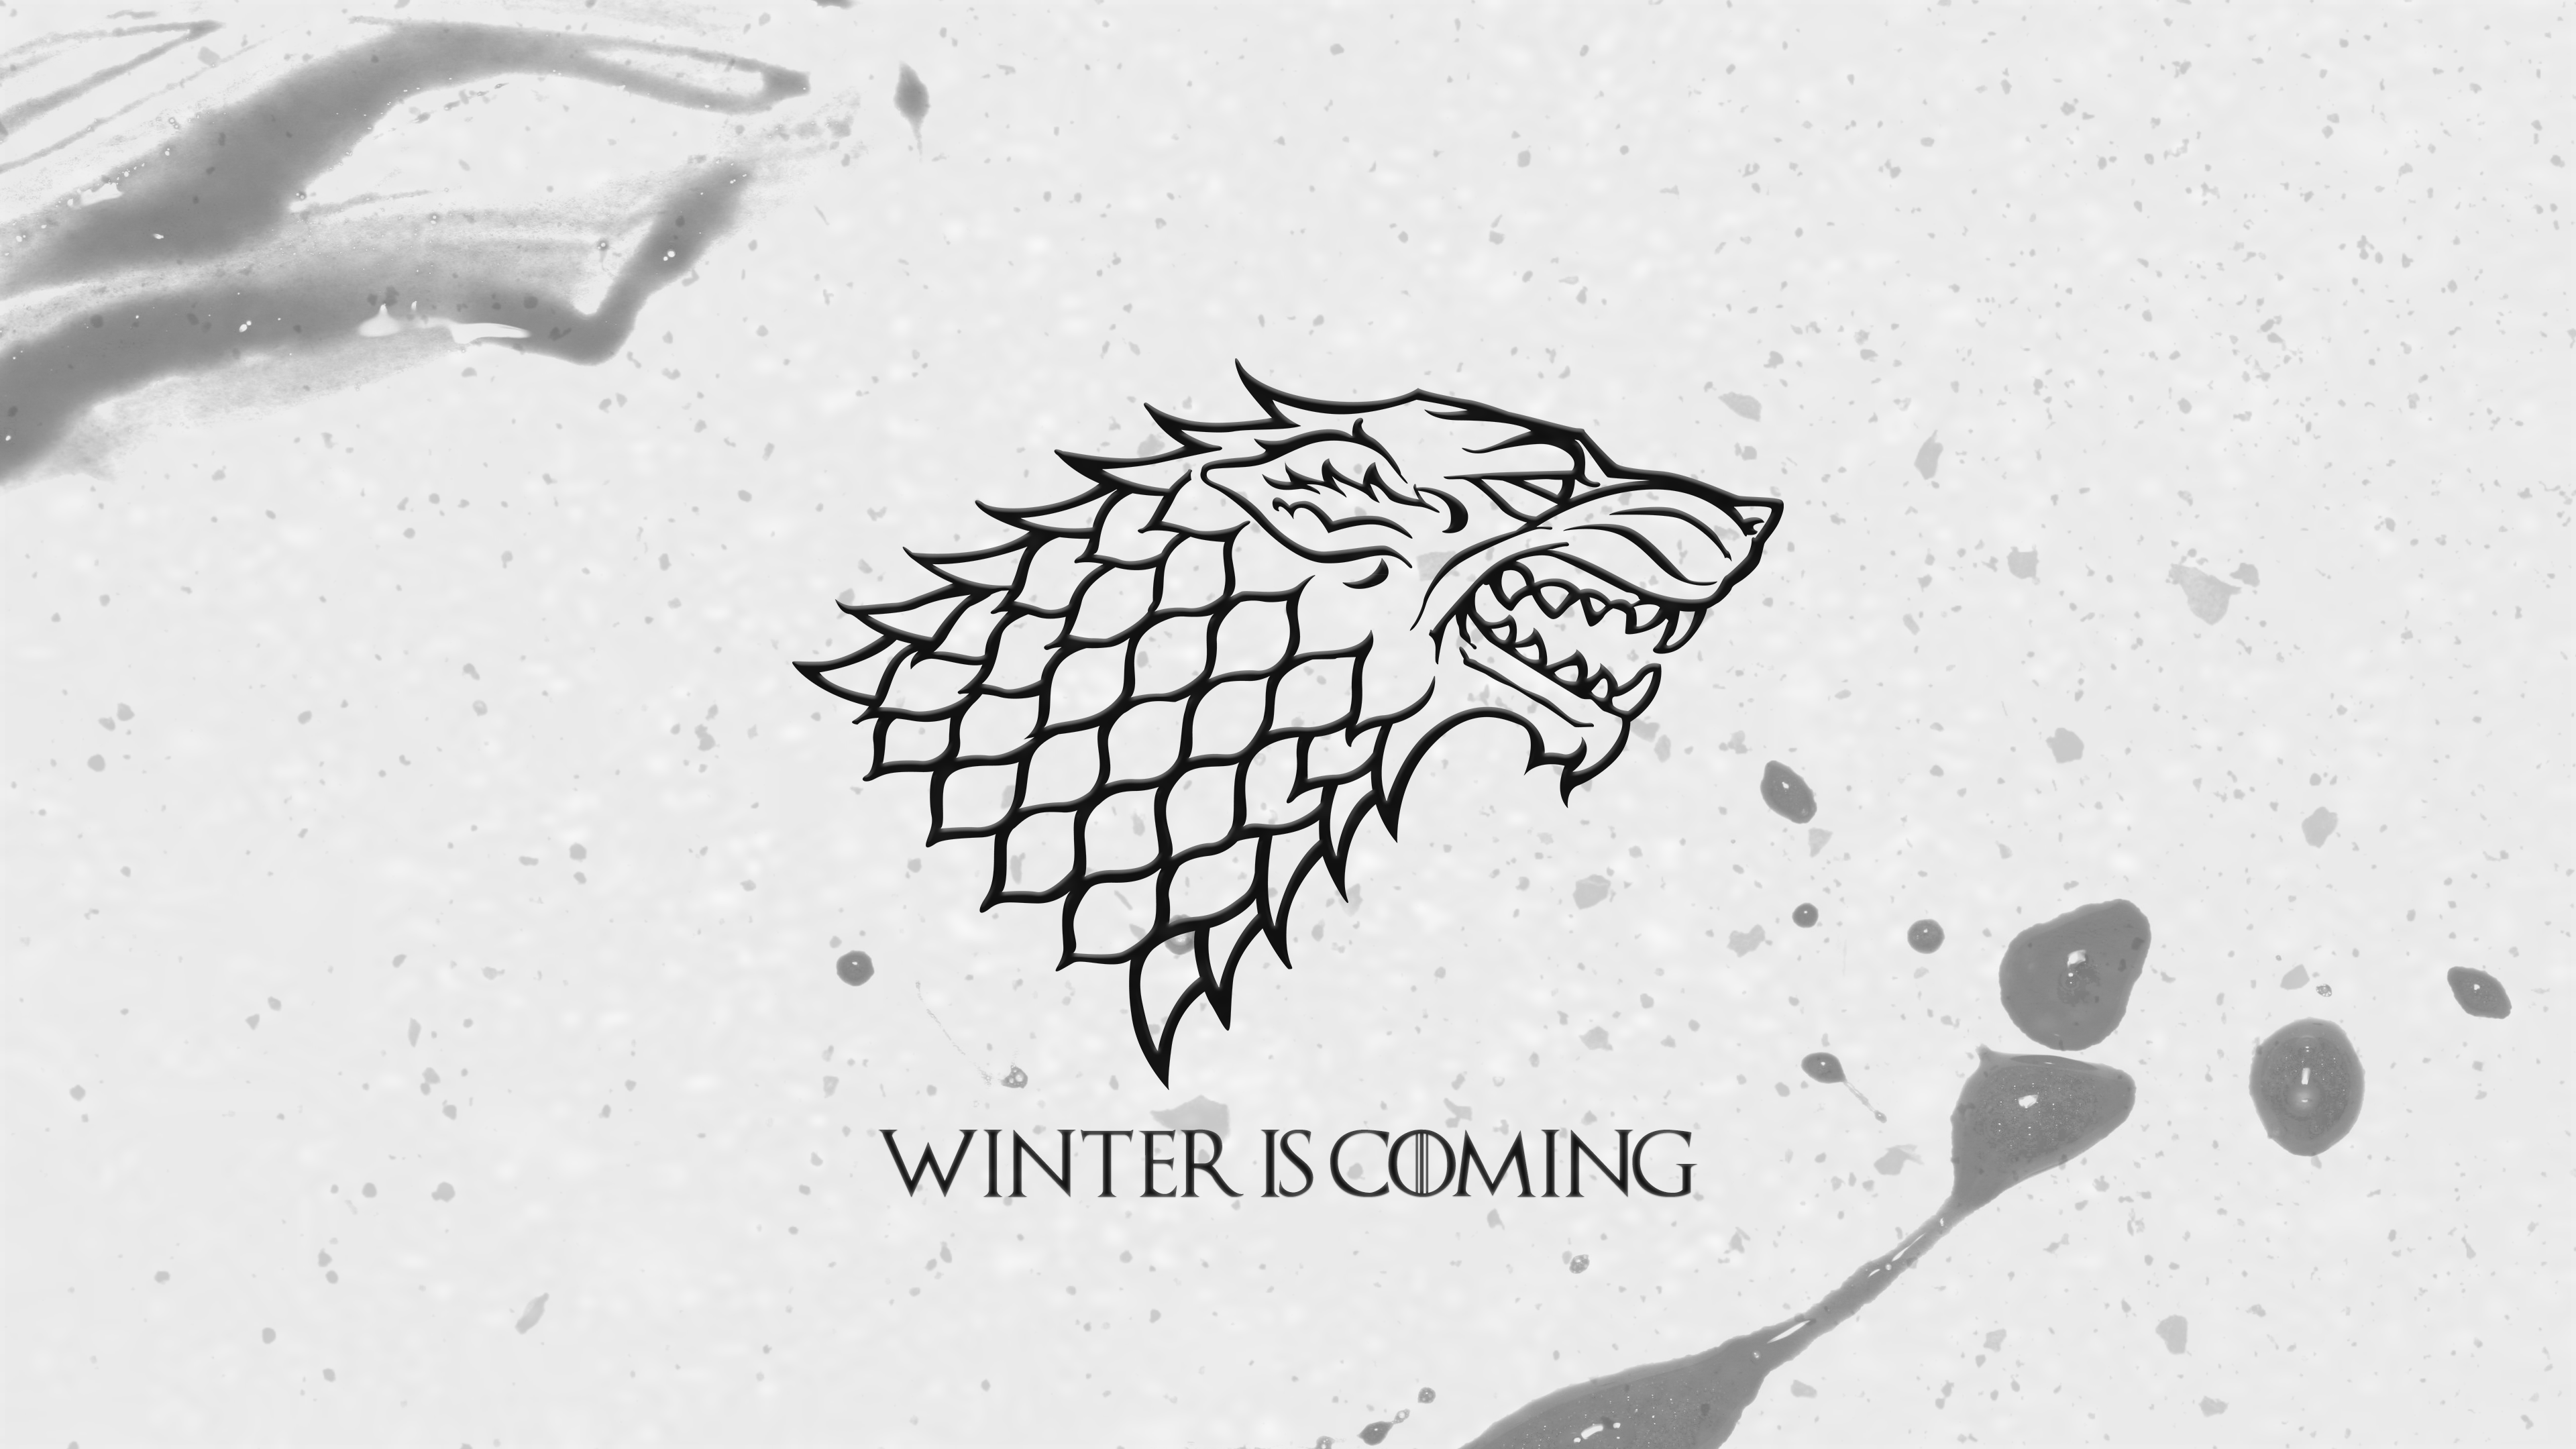 House Stark, blood, Winter Is Coming, A Song of Ice and Fire, Jon